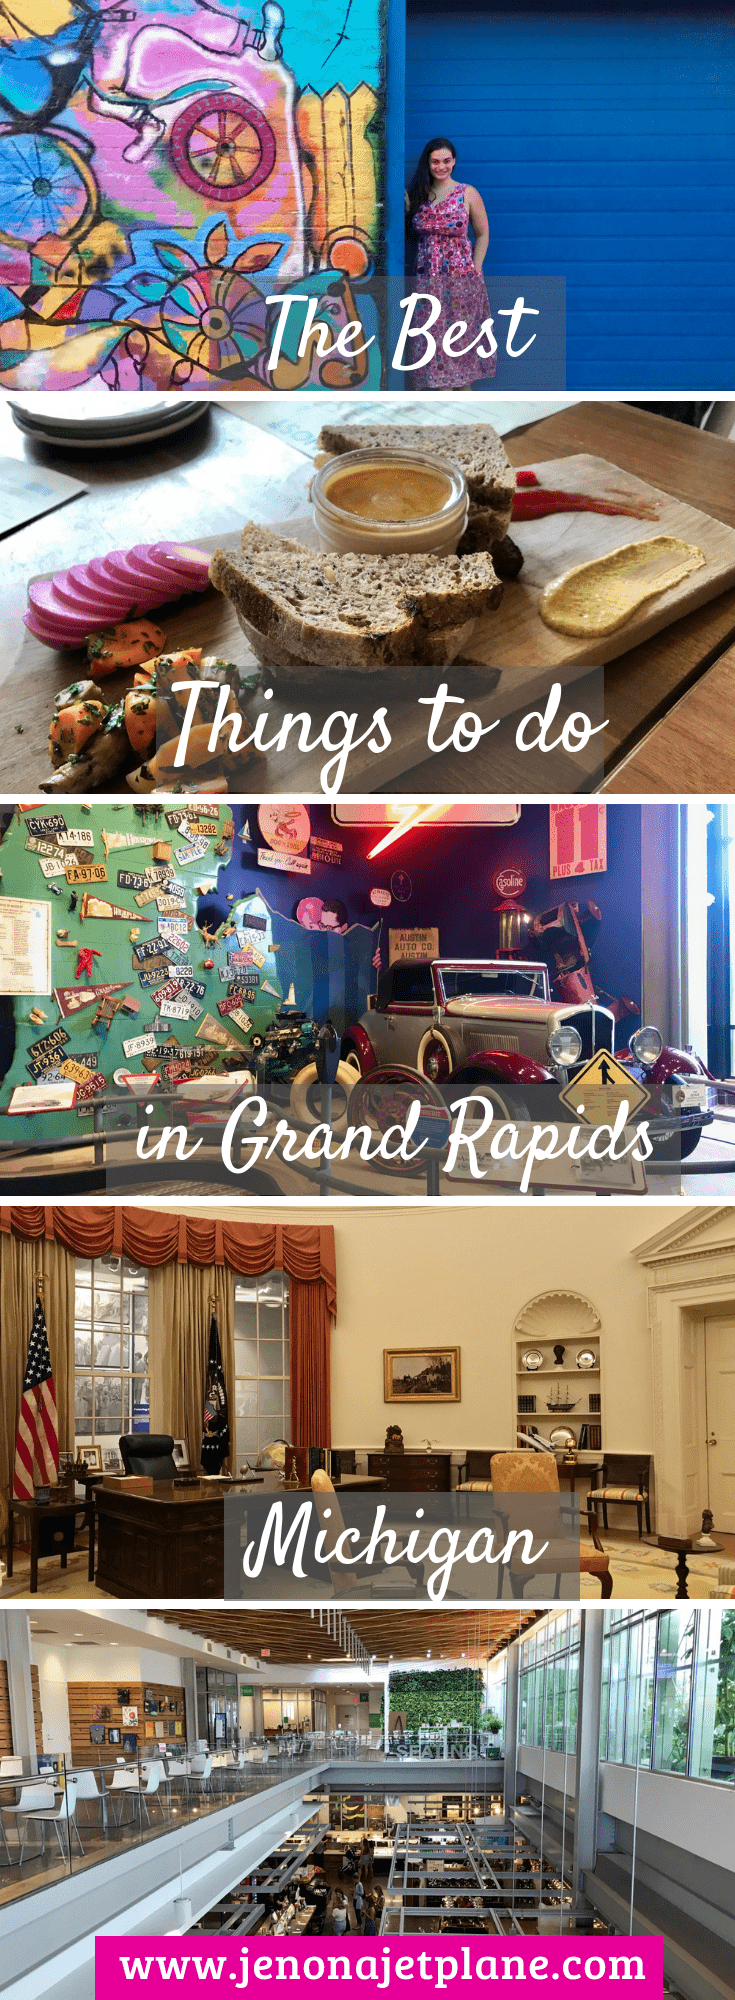 Looking for the best things to do in Grand Rapids, Michigan? From rooftop bars to street art finds, here 12 activities you can't miss! #grandrapidsMI #michigantravel #experiencegrandrapids #thingstodograndrapids